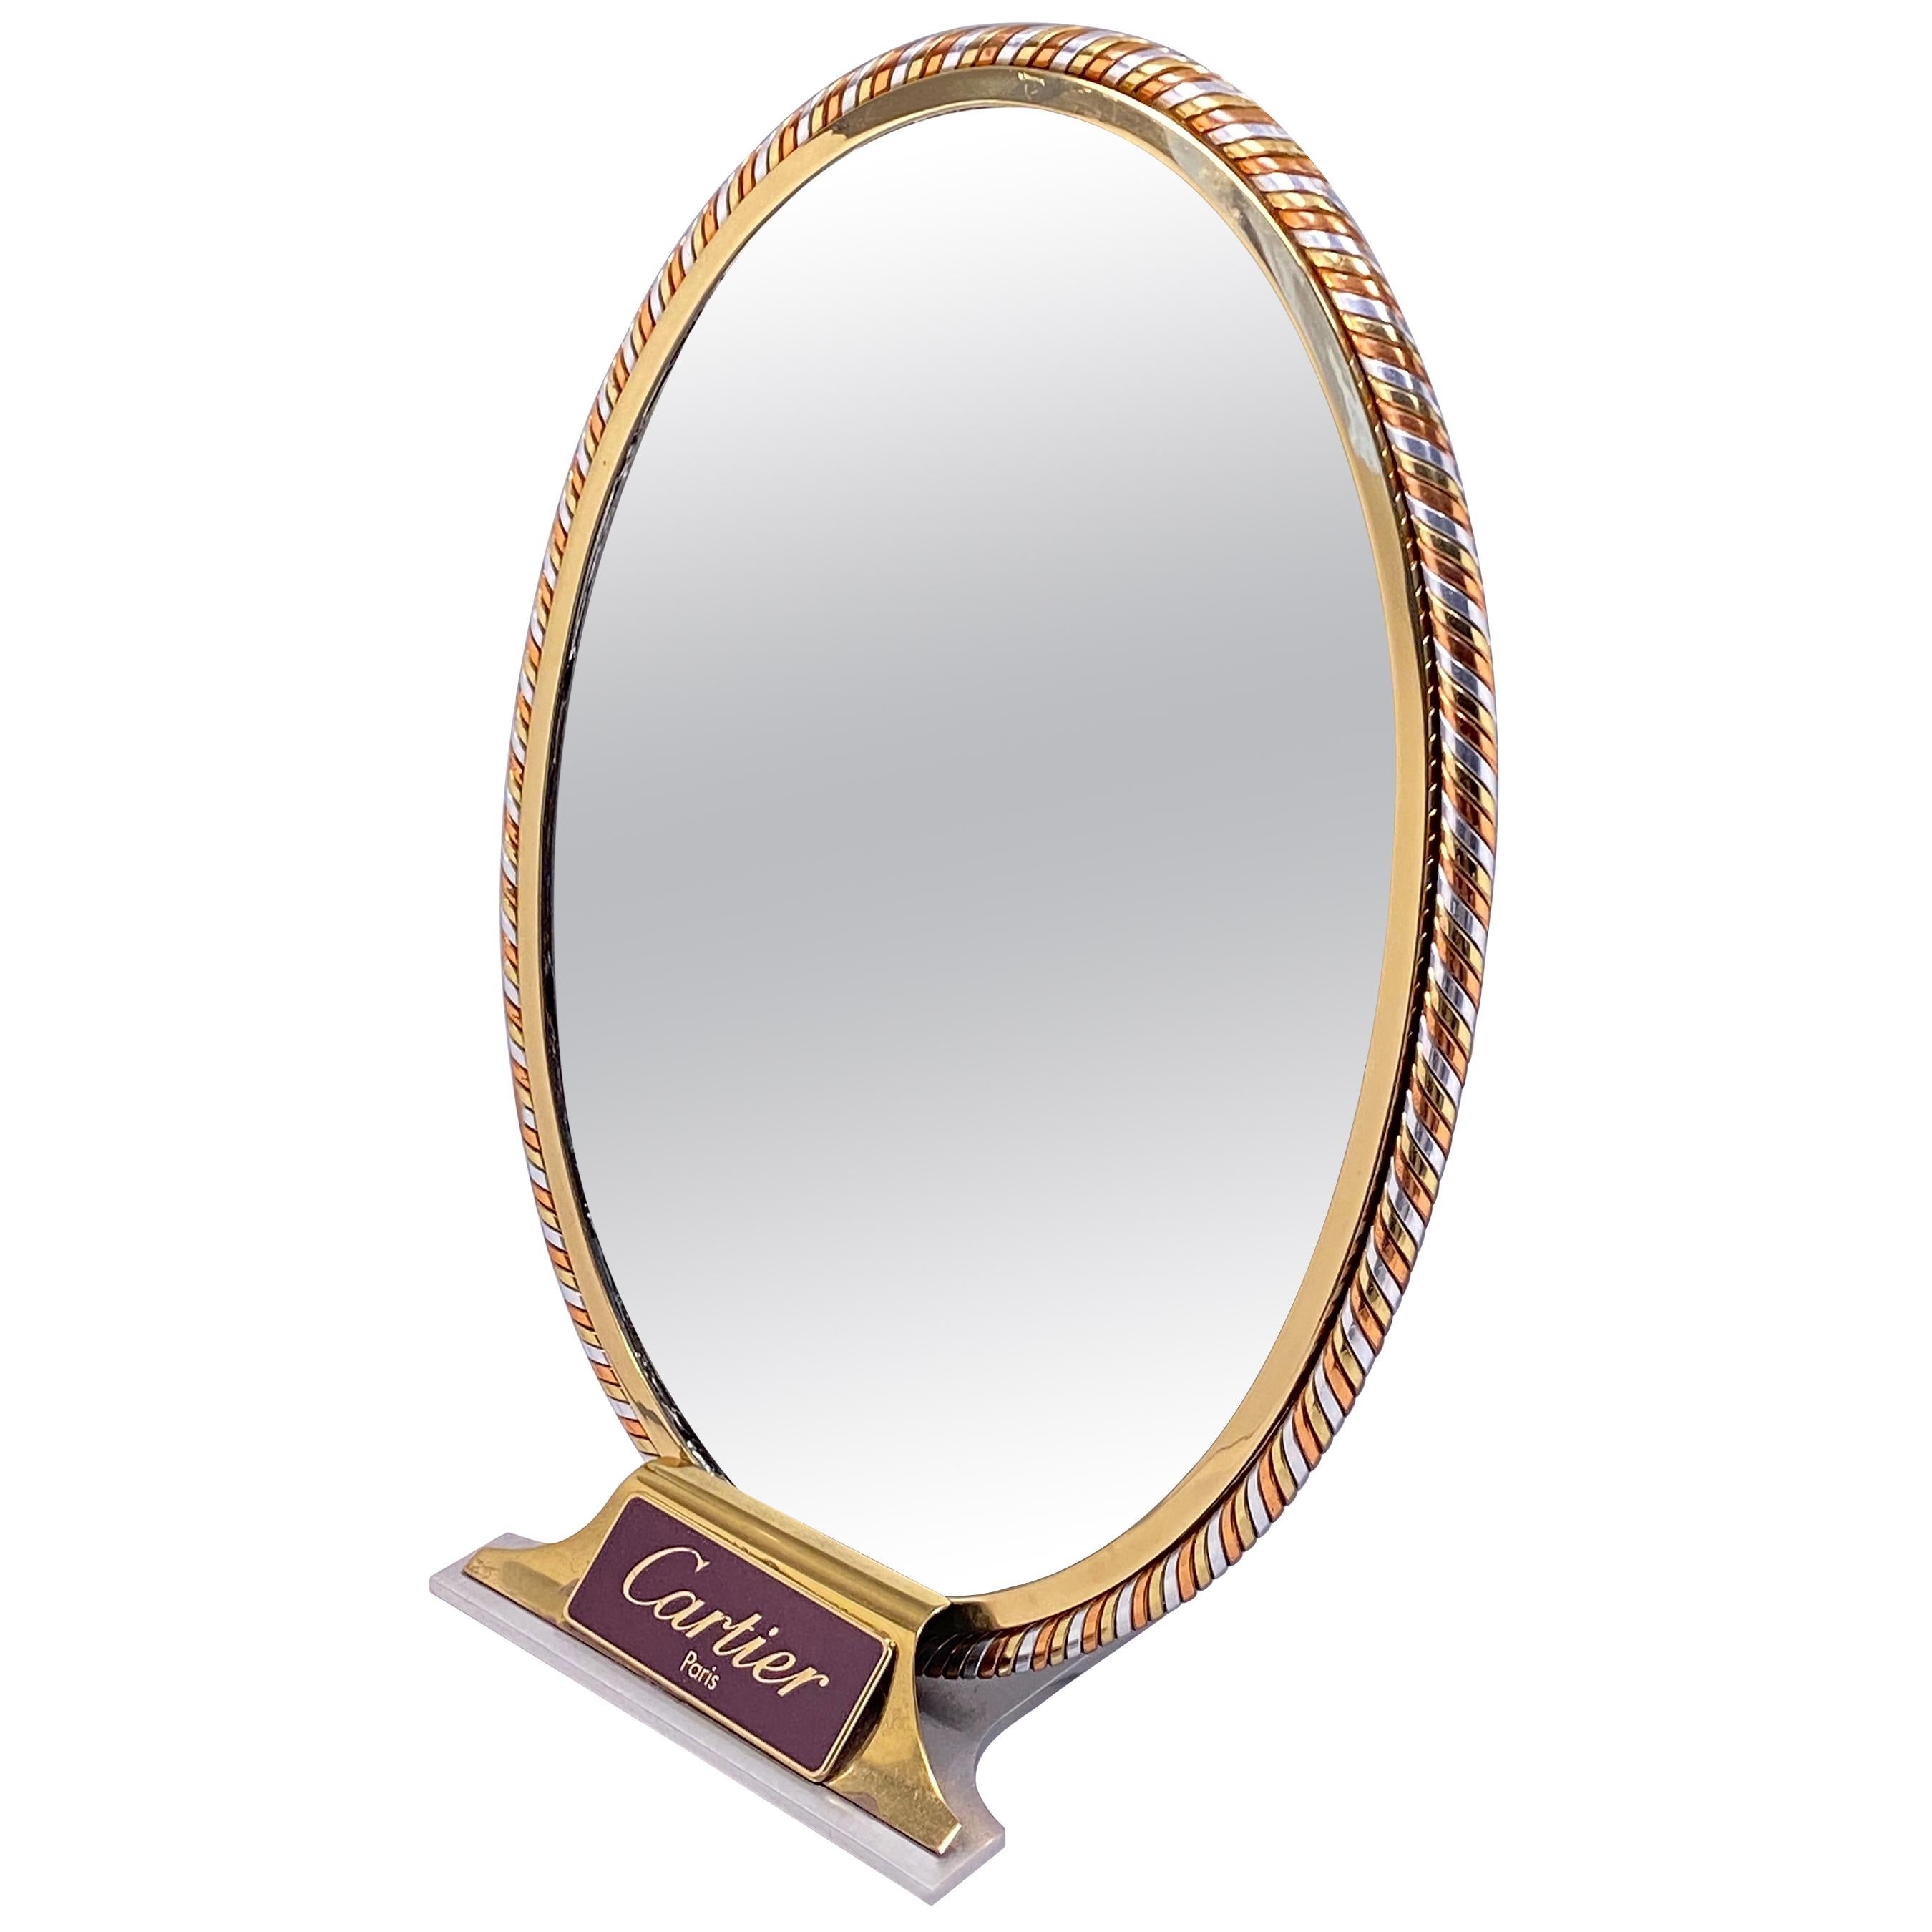 Cartier Mirrors - 5 For Sale at 1stDibs